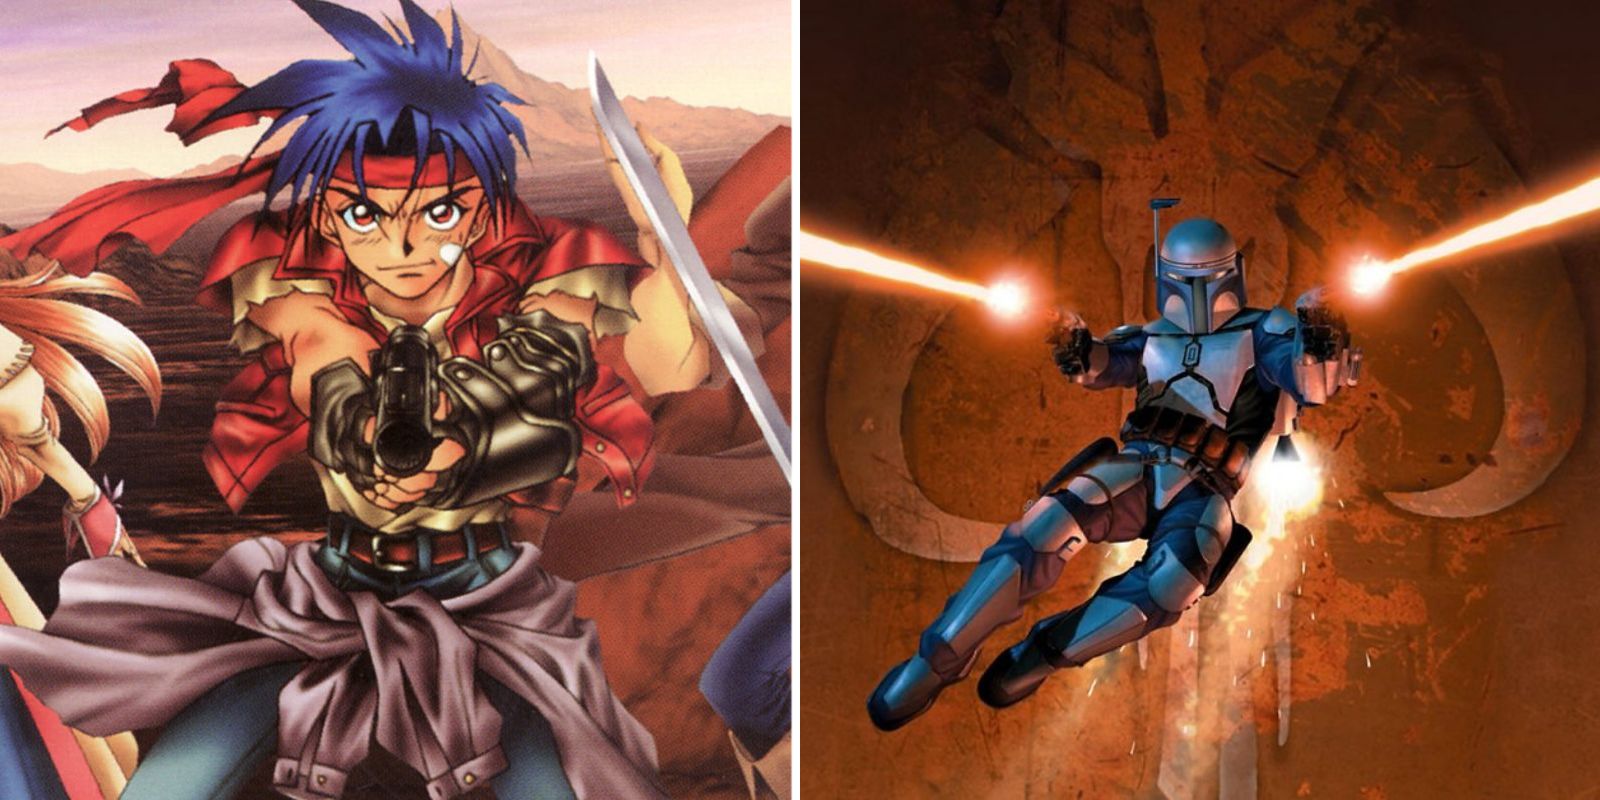 Rudy from Wild Arms and Jango Fett from Star Wars: Bounty Hunter